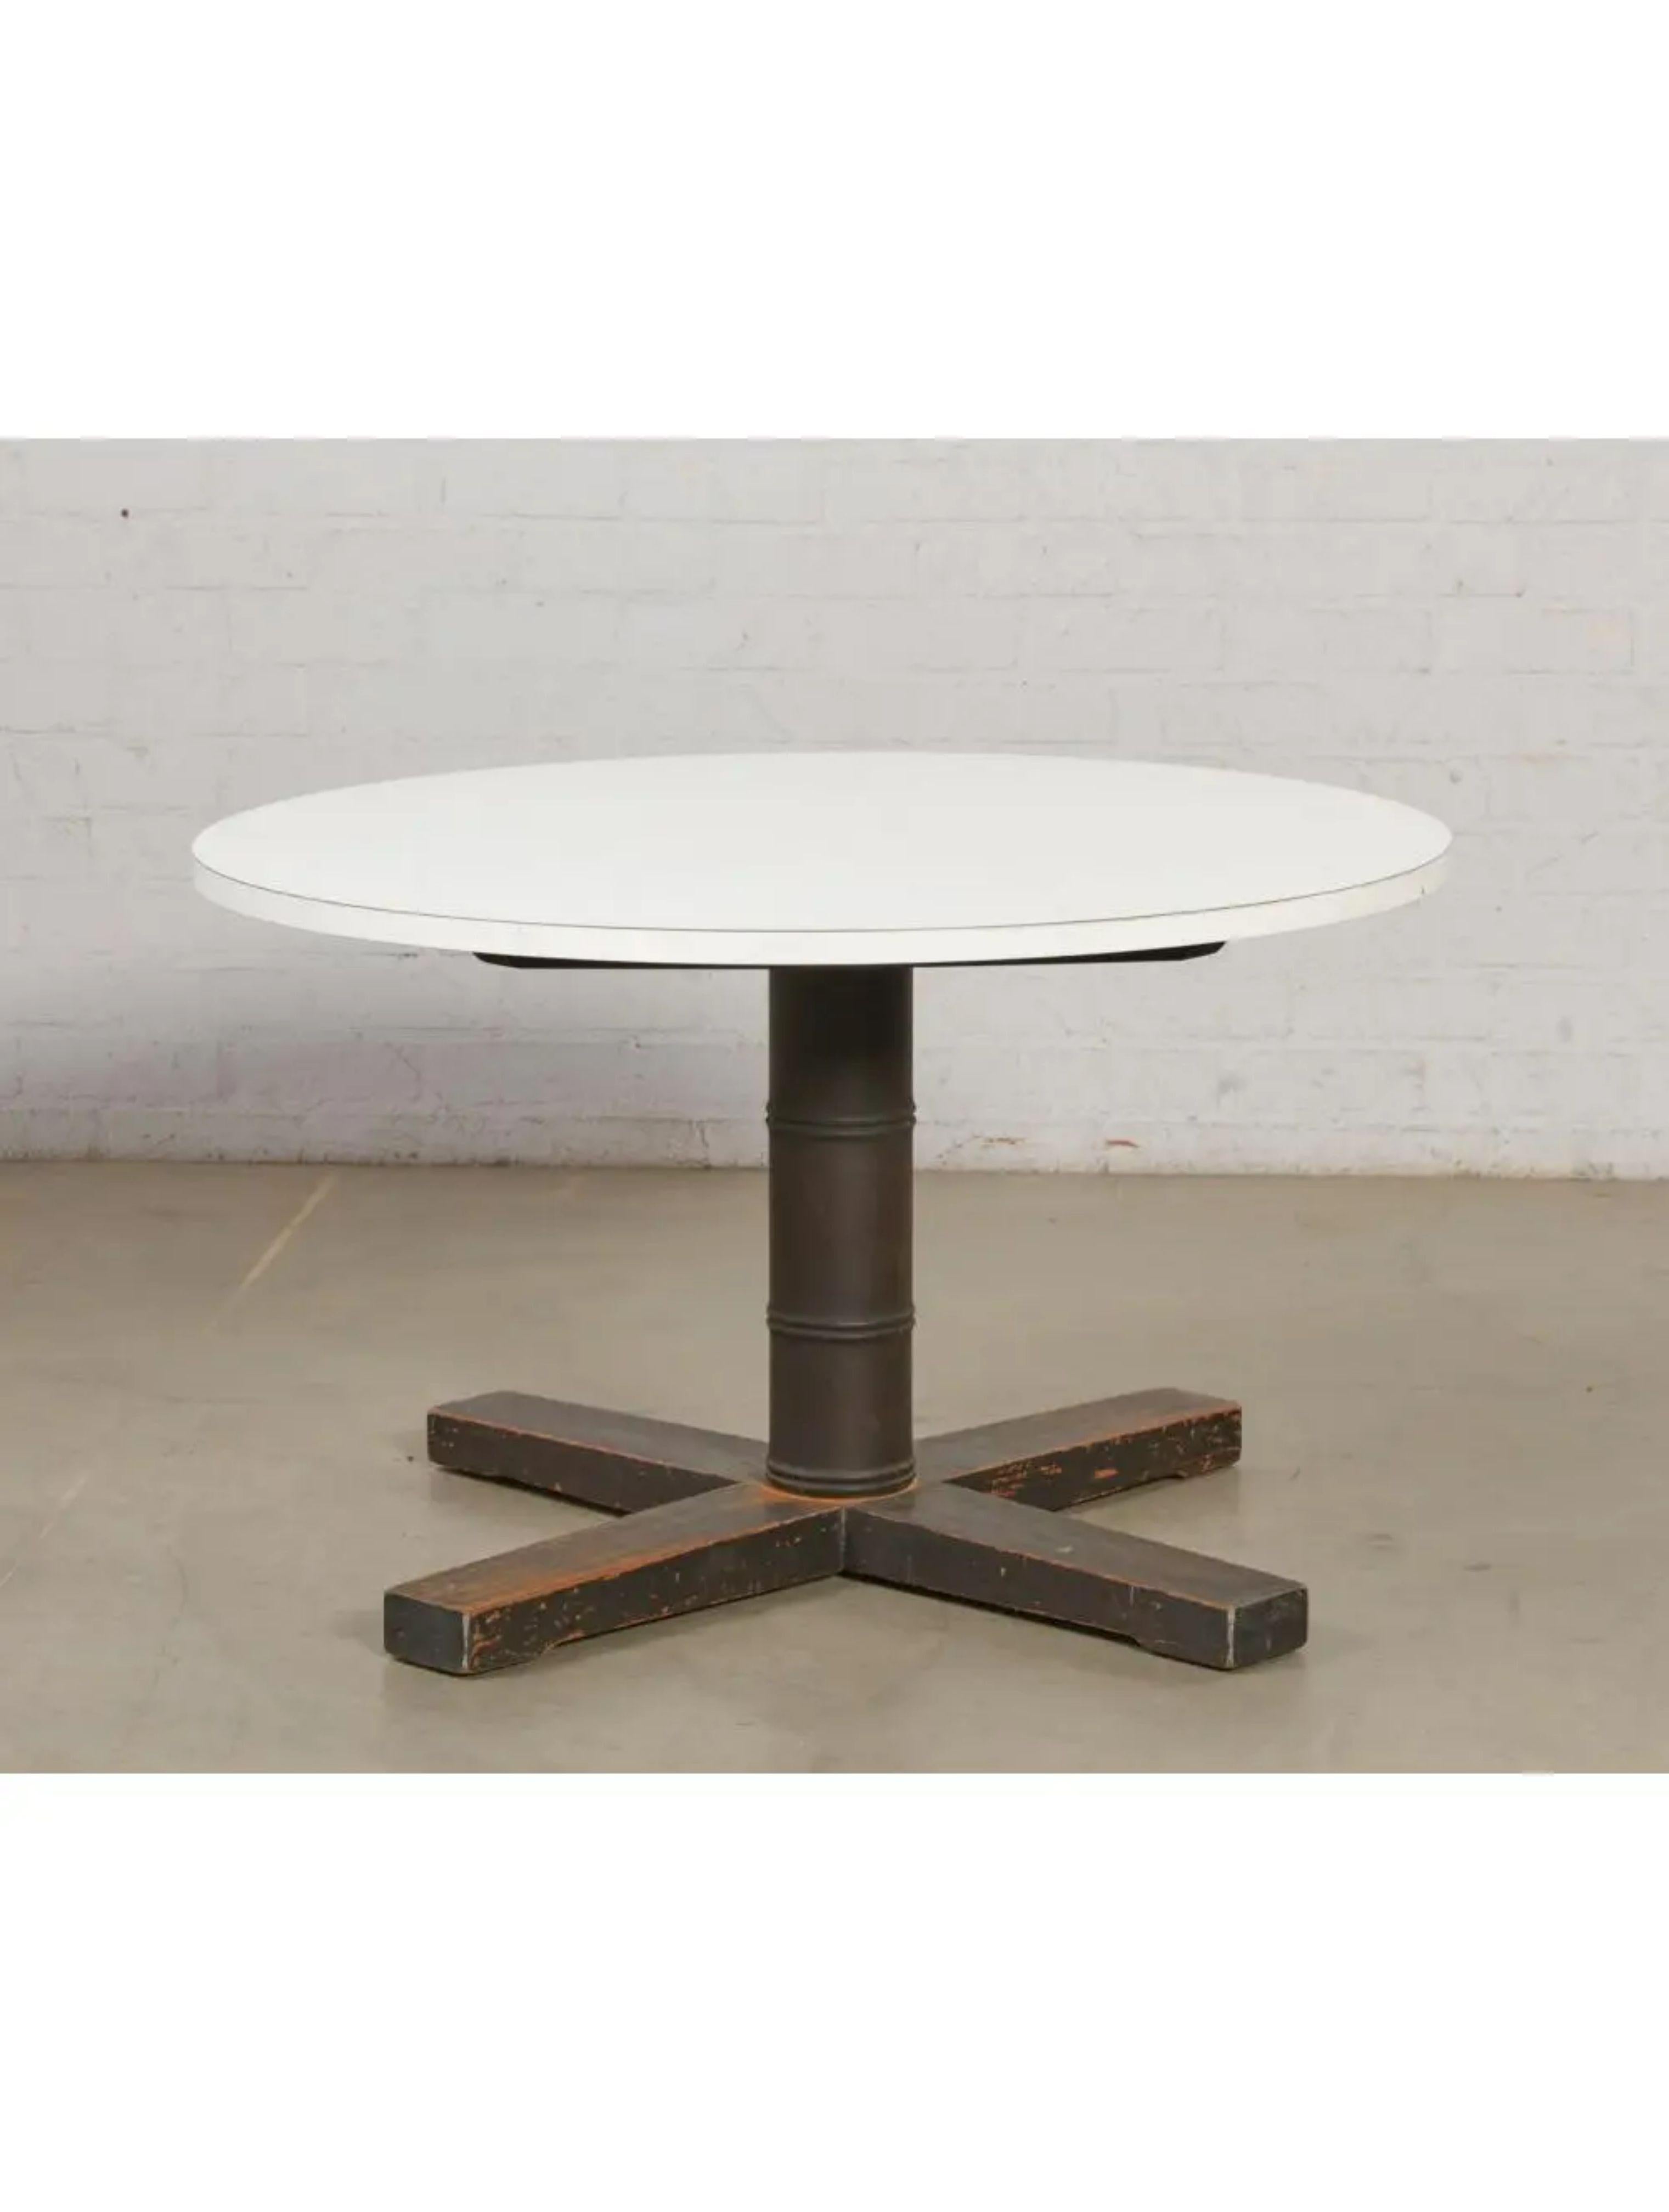 Modern McGuire Furniture Company Pedestal Table, 2010s For Sale